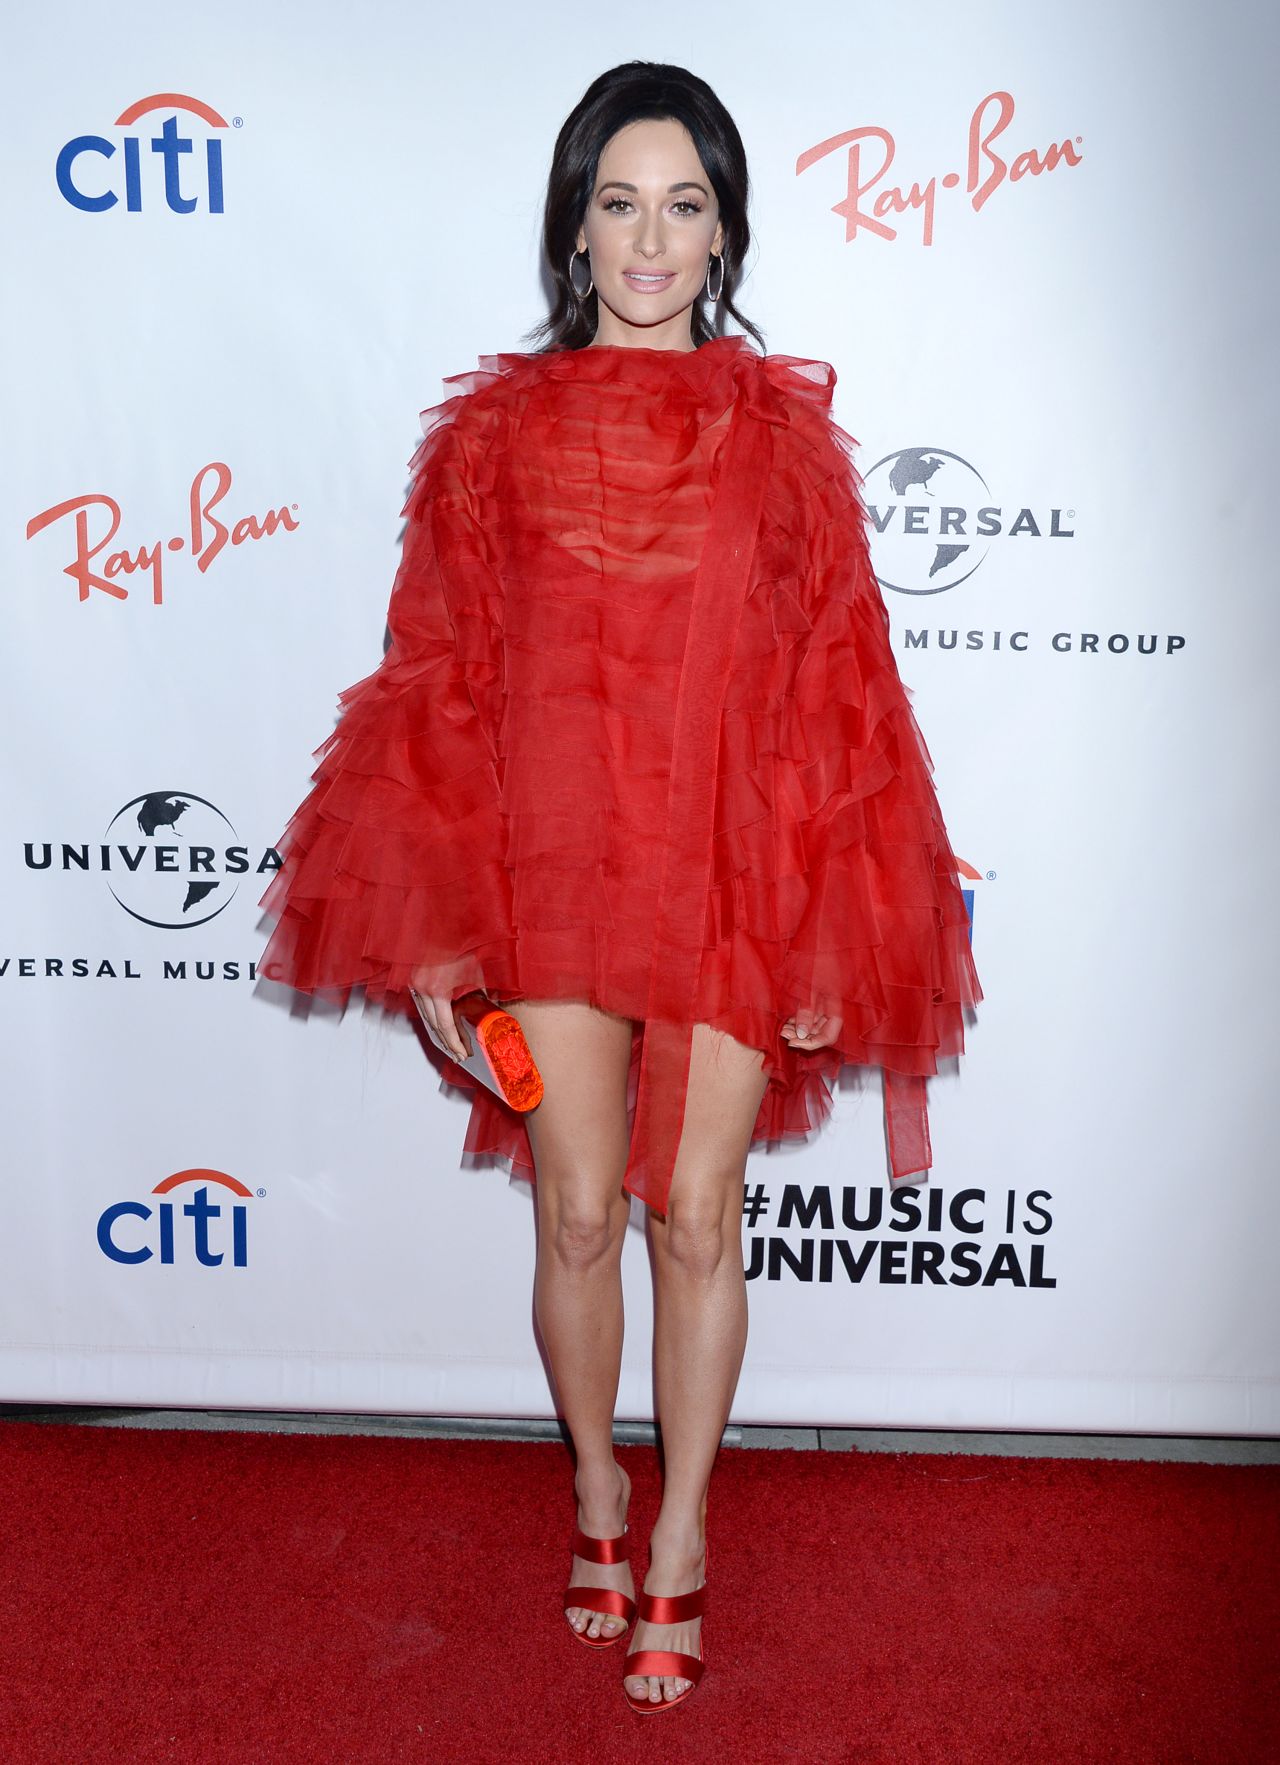 Kacey Musgraves – Universal Music Group Grammy After Party 02/10/2019